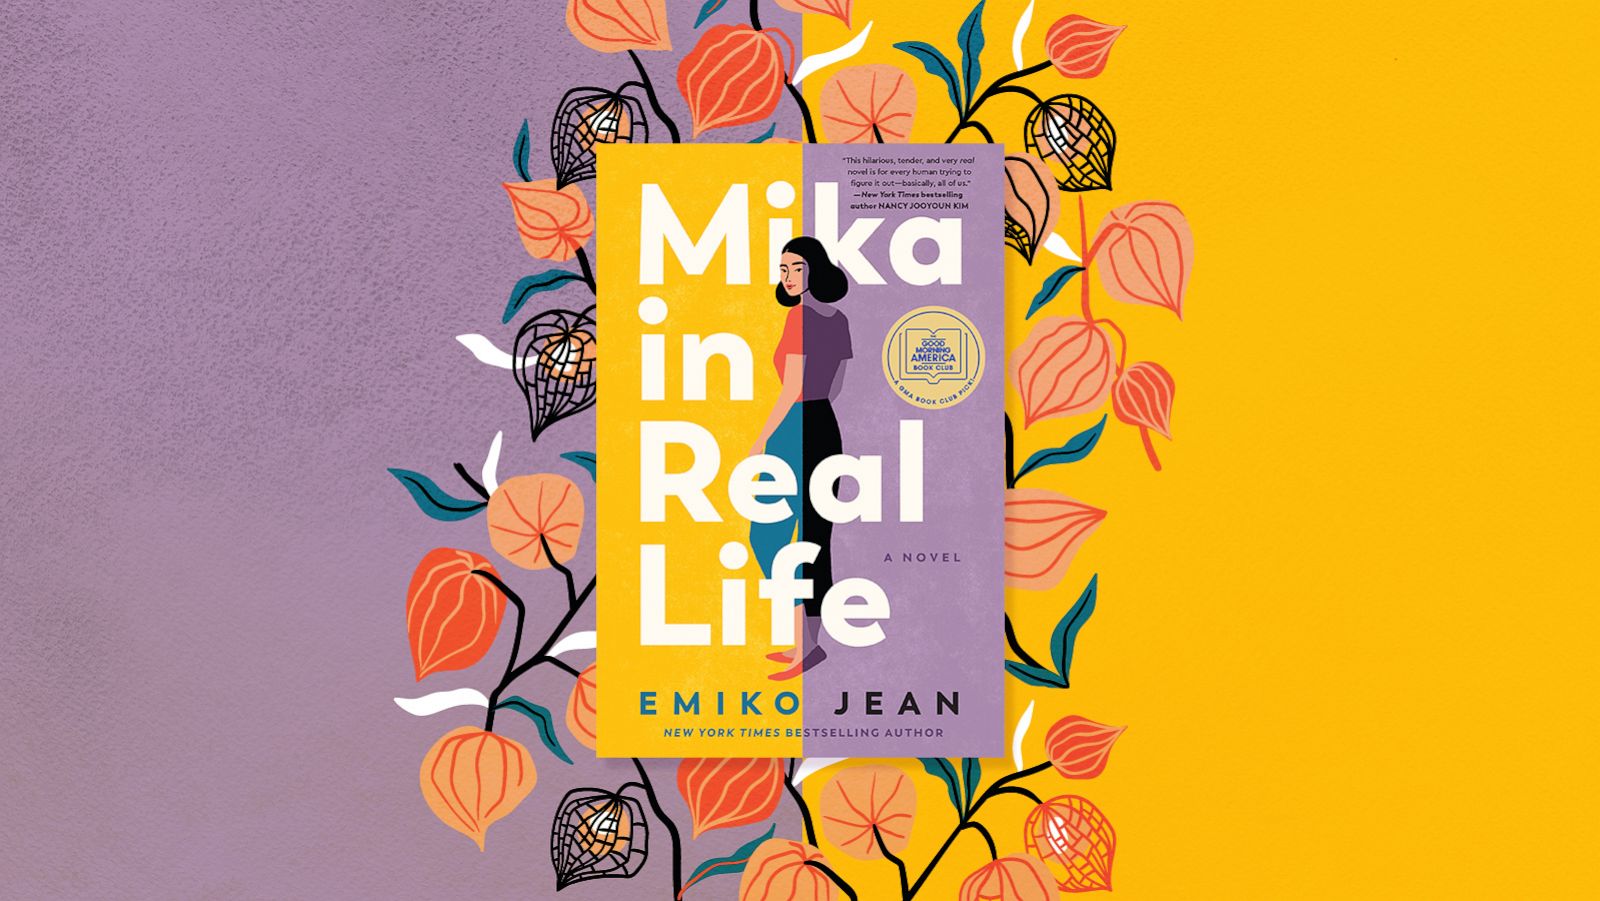 PHOTO: 'Mika in Real Life' by Emiko Jean is the GMA Book Club pick for August